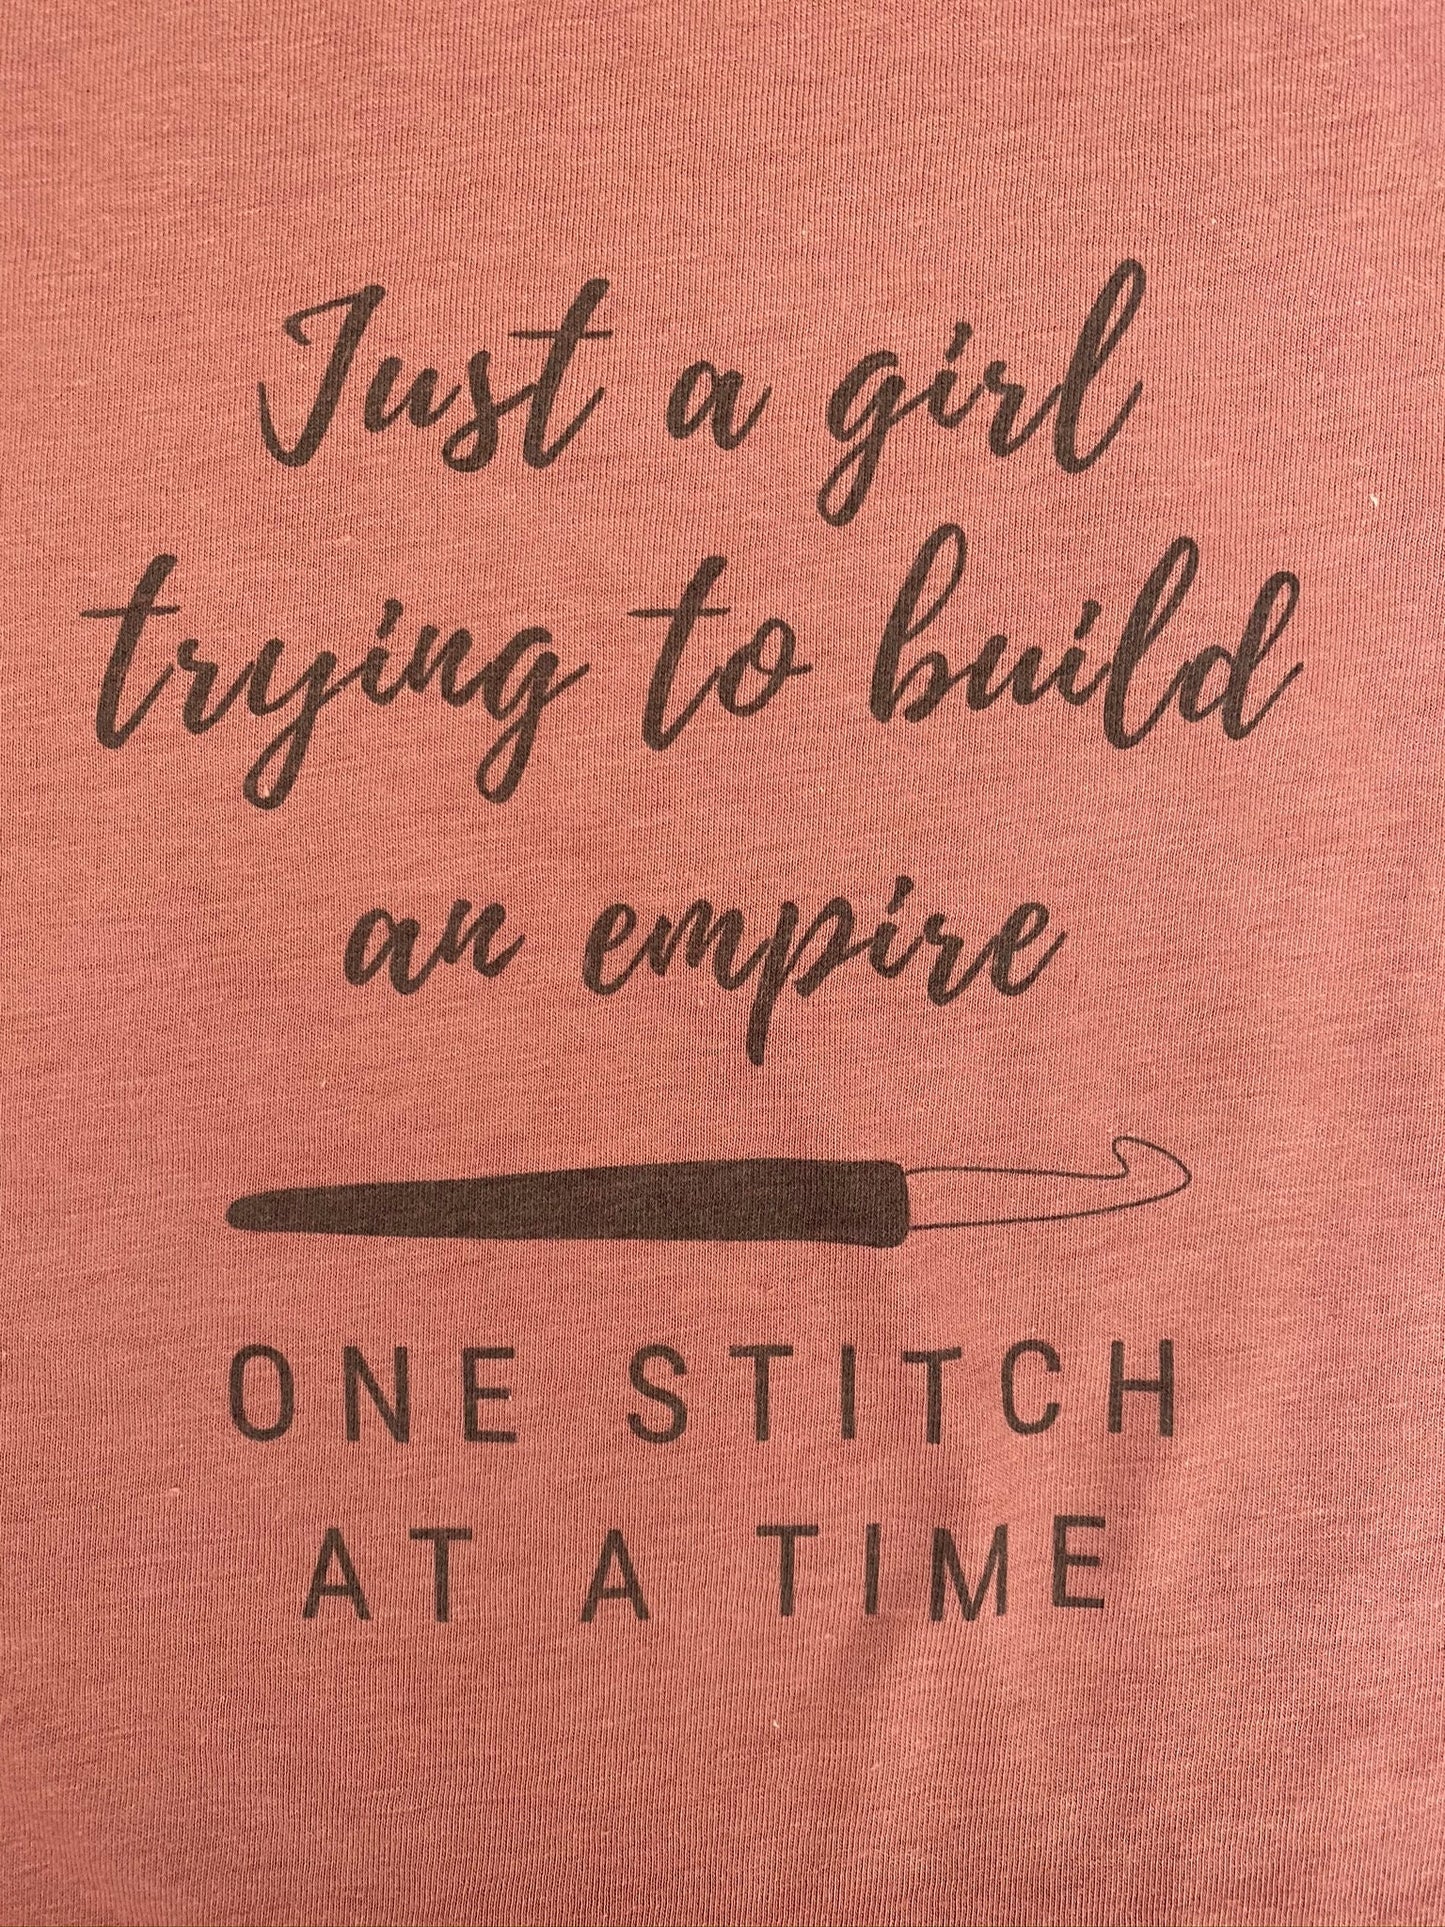 Just a girl trying to build an empire one stitch at a time Tank Top Shirt